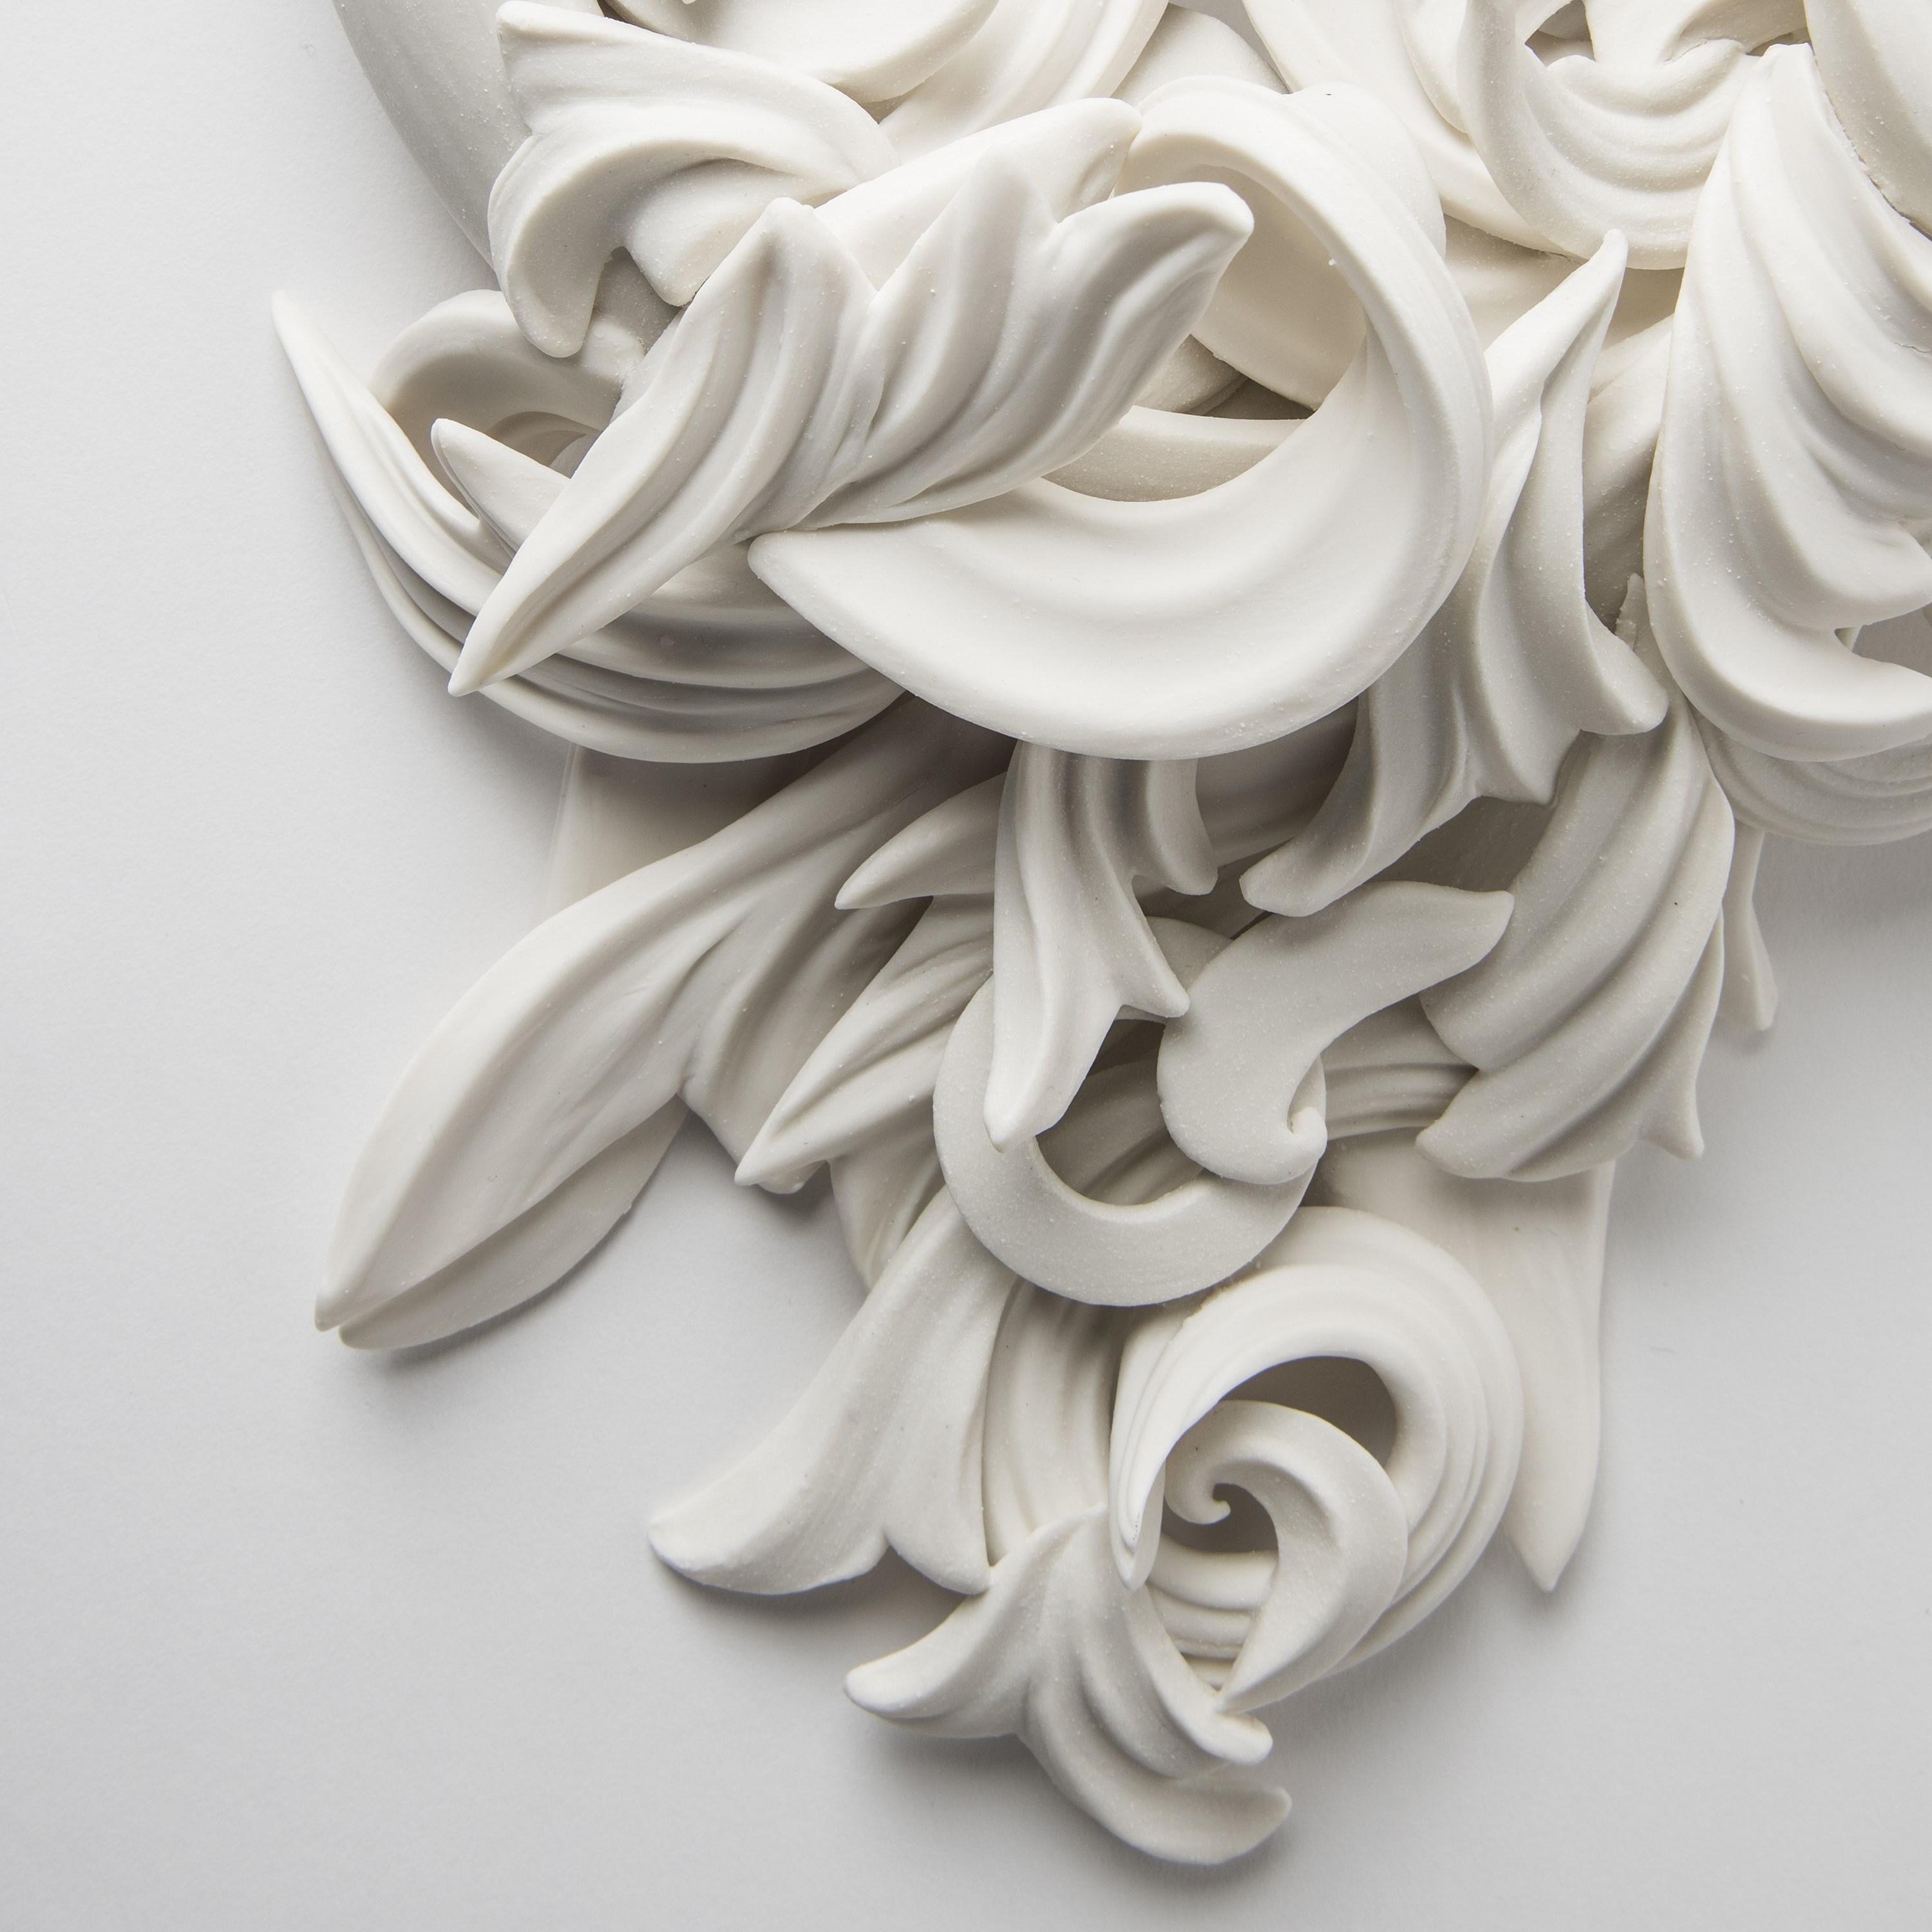 Hand-Crafted Cincture, a Unique Porcelain Architectural Wall Installation by Jo Taylor For Sale